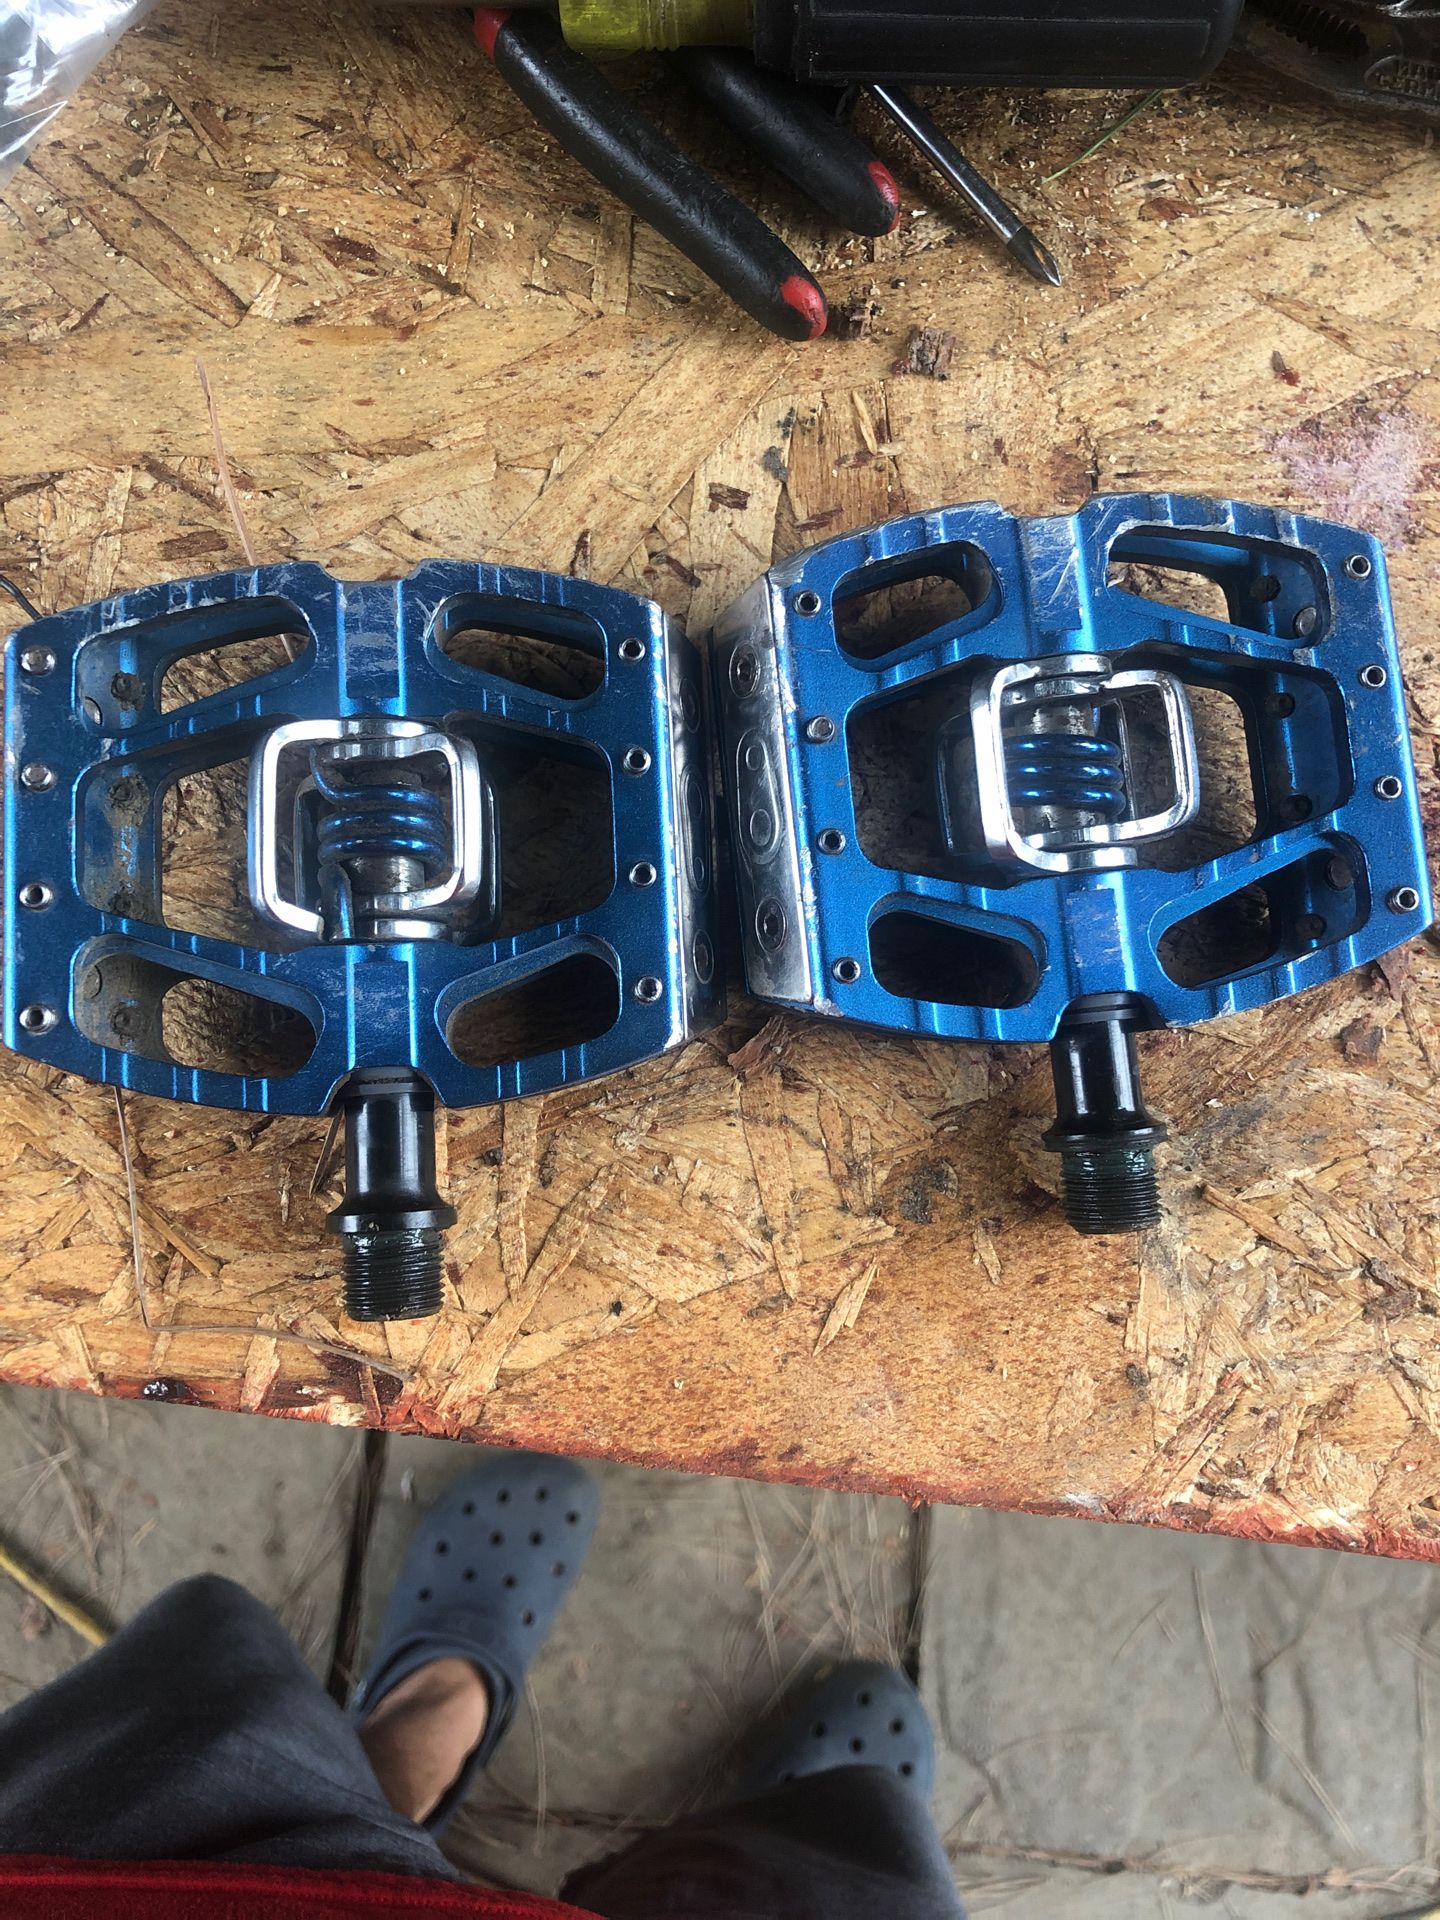 Specialized mountain bike pedals